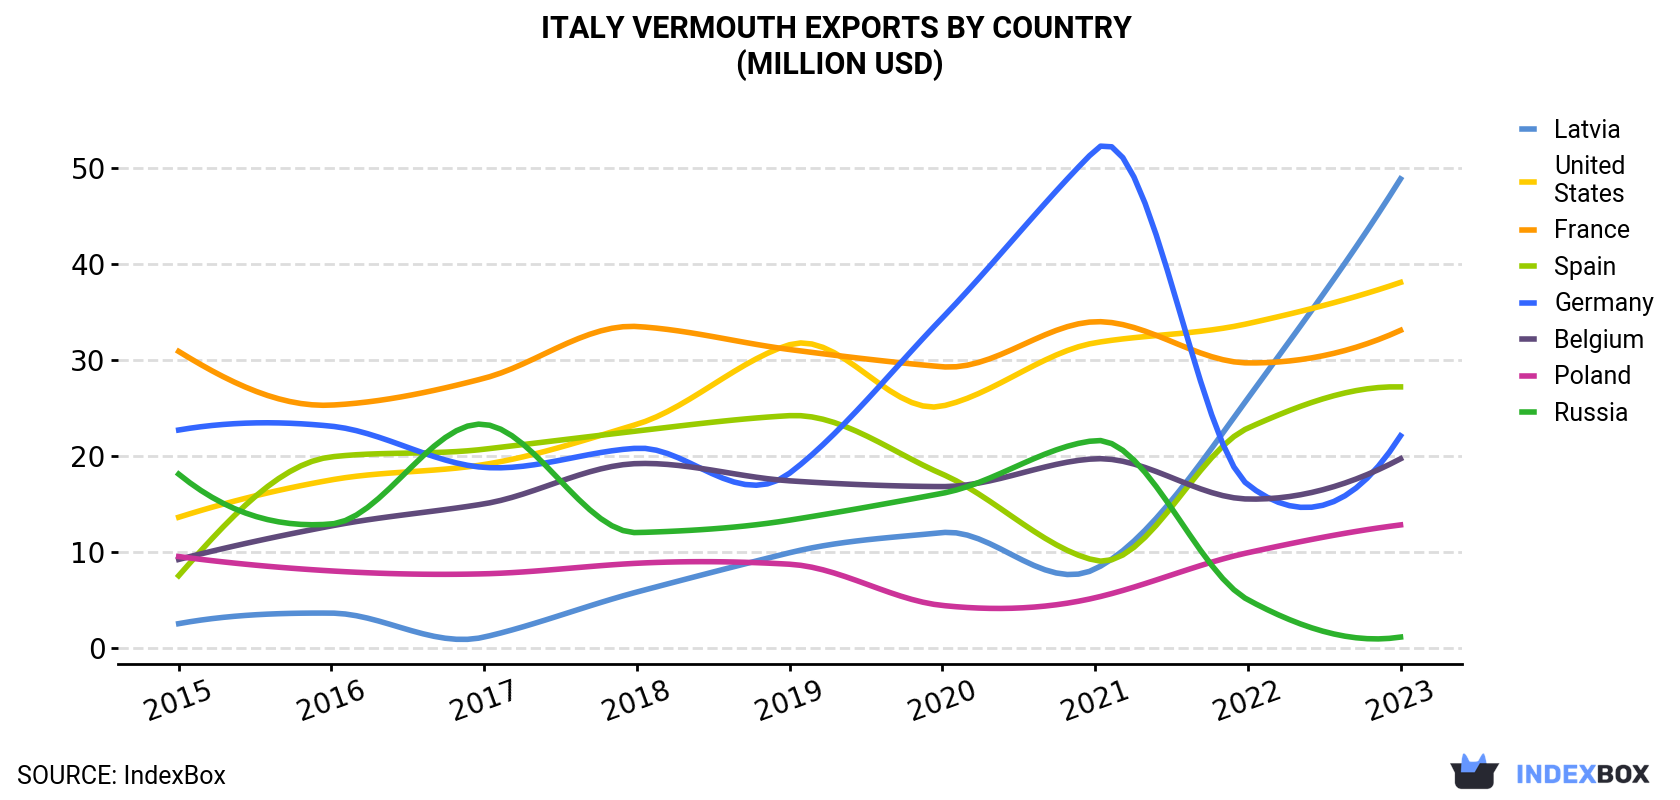 Italy Vermouth Exports By Country (Million USD)